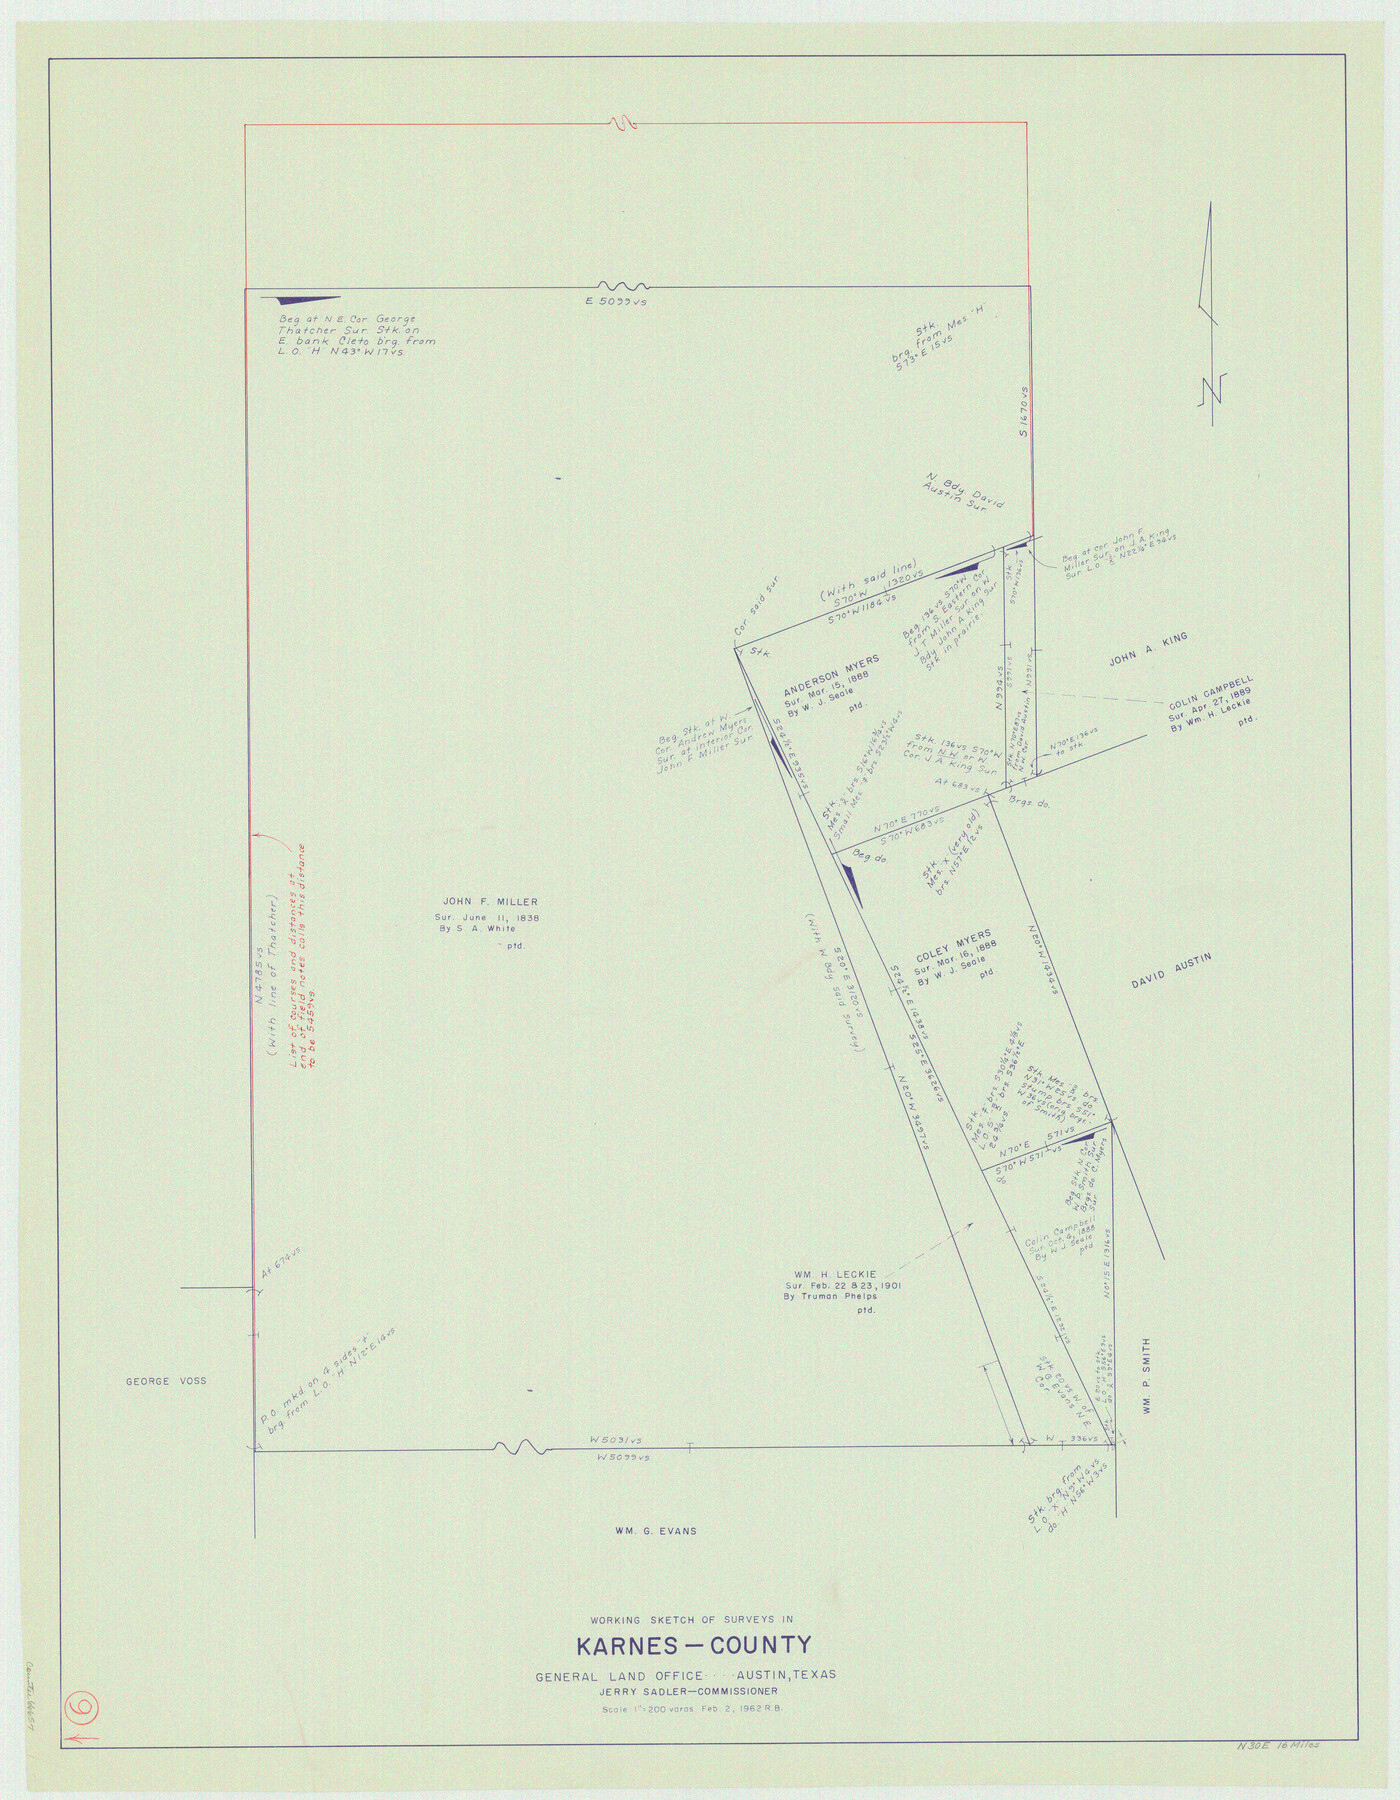 66657, Karnes County Working Sketch 9, General Map Collection